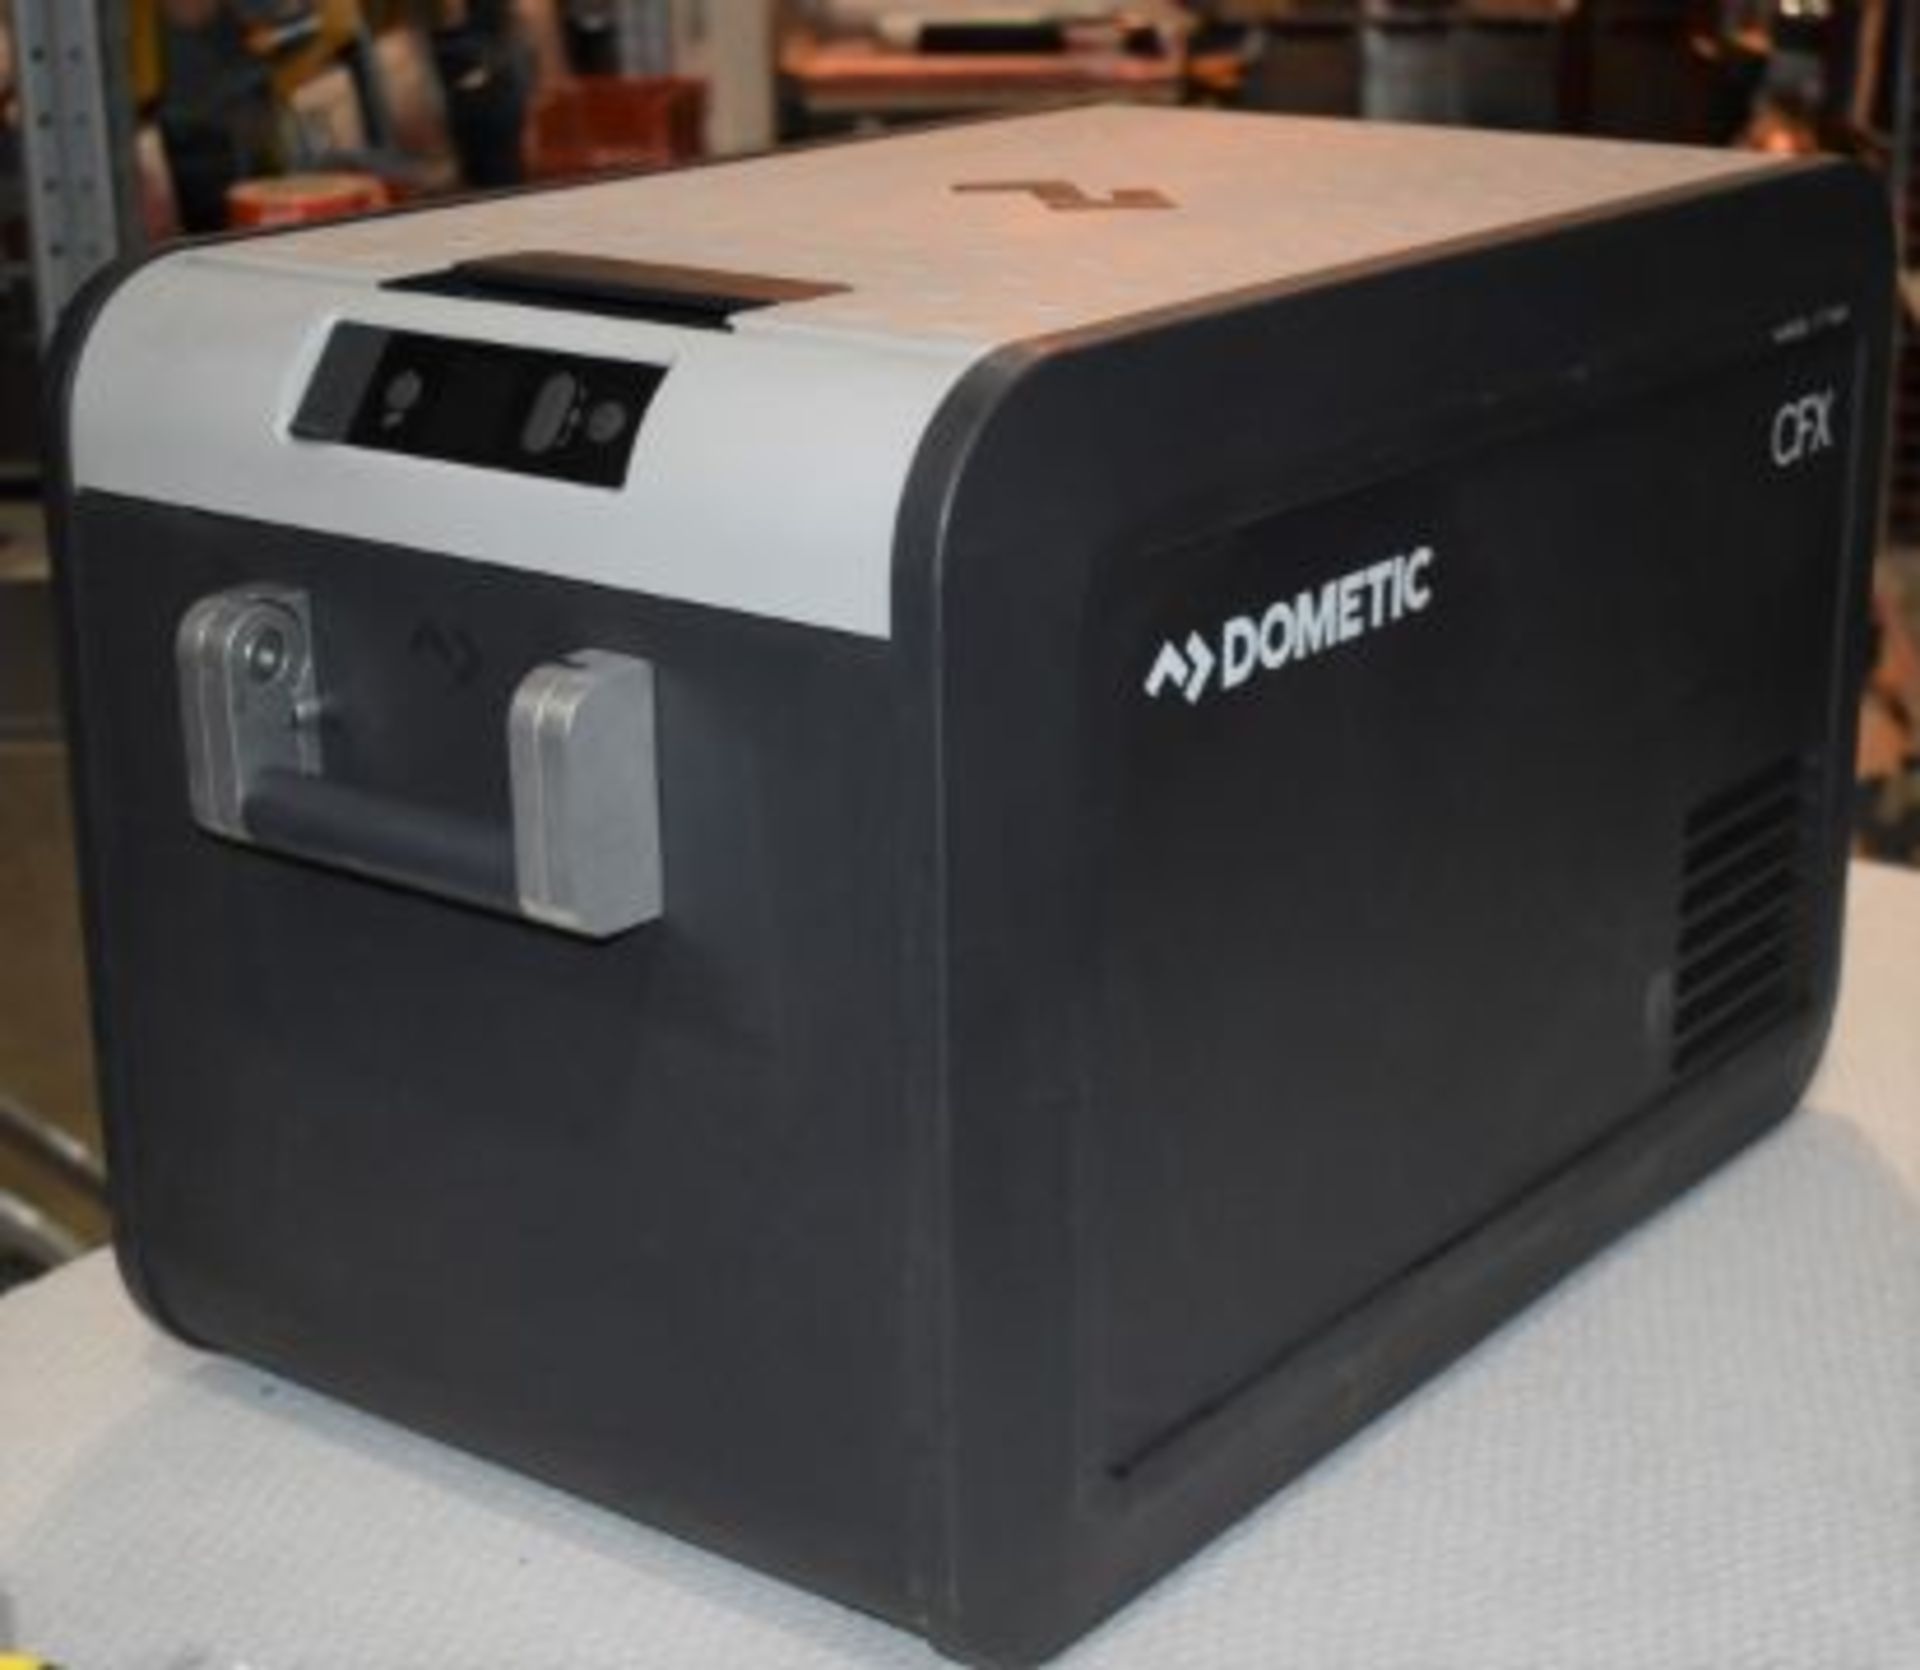 1 x Dometic CFX3 35 Portable 32l Compressor Cooler and Freezer - Perfect For Cooling The Christmas - Image 2 of 9